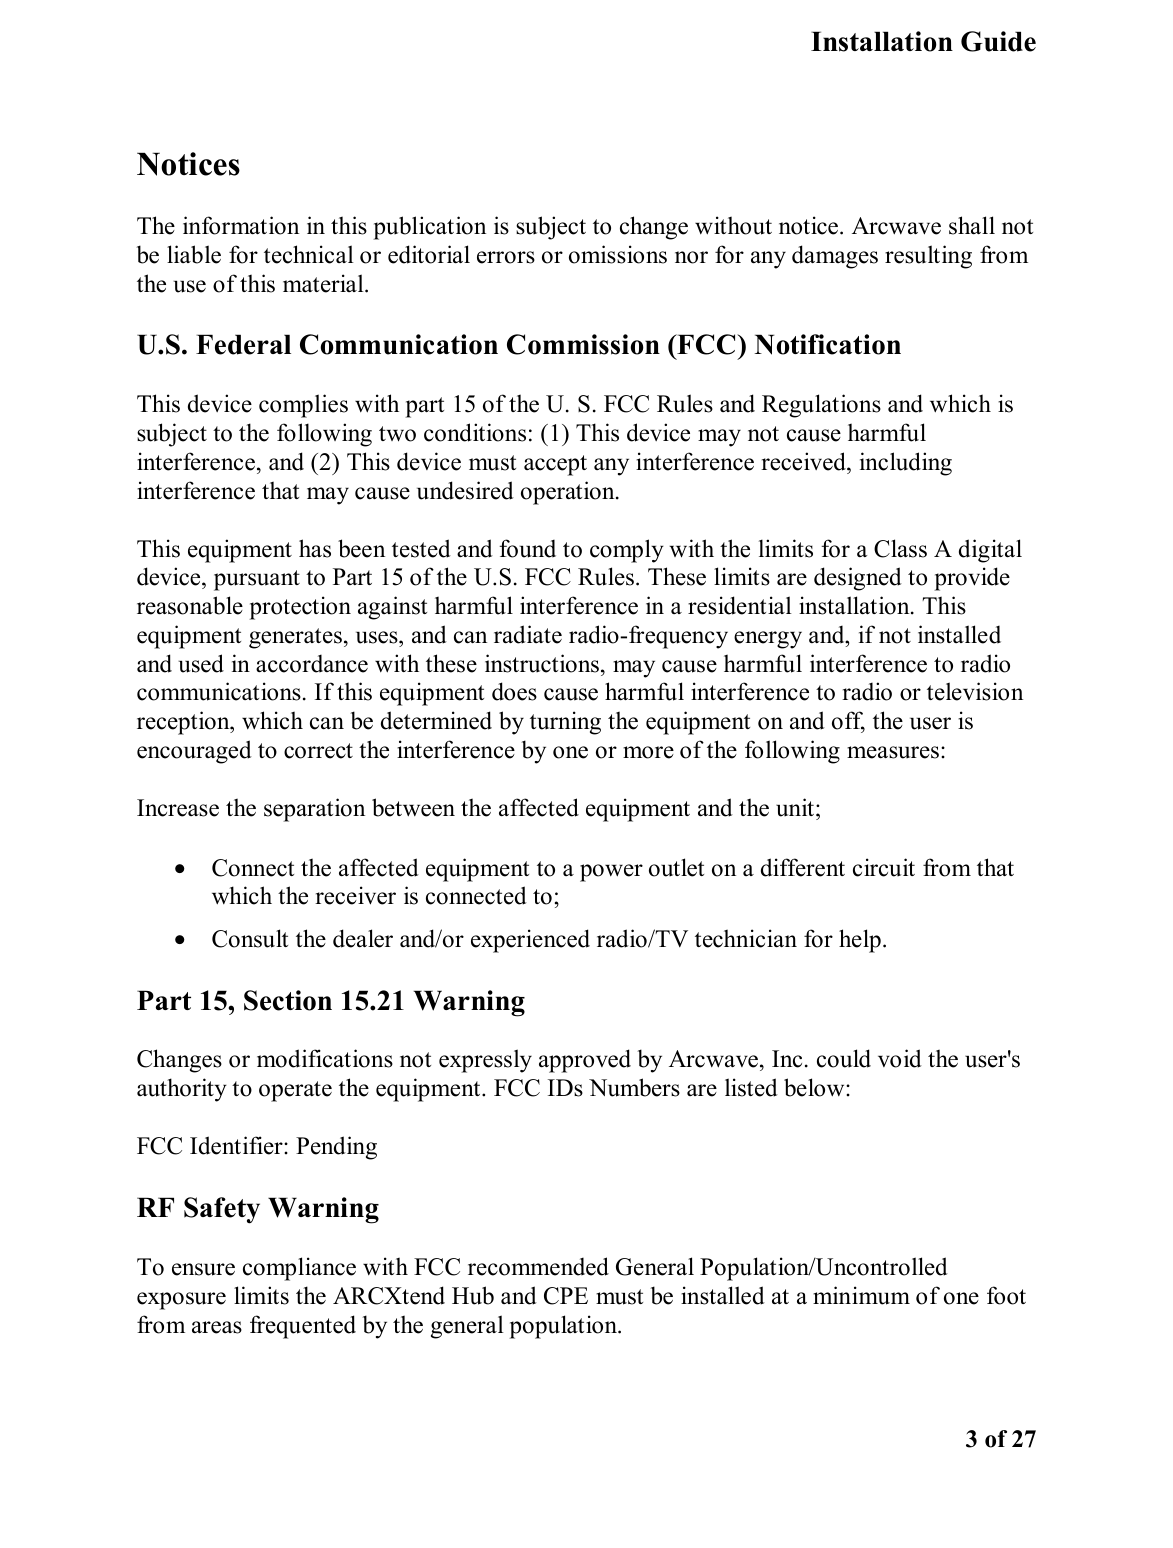   Installation Guide    3 of 27  Notices The information in this publication is subject to change without notice. Arcwave shall not be liable for technical or editorial errors or omissions nor for any damages resulting from the use of this material. U.S. Federal Communication Commission (FCC) Notification  This device complies with part 15 of the U. S. FCC Rules and Regulations and which is subject to the following two conditions: (1) This device may not cause harmful interference, and (2) This device must accept any interference received, including interference that may cause undesired operation.  This equipment has been tested and found to comply with the limits for a Class A digital device, pursuant to Part 15 of the U.S. FCC Rules. These limits are designed to provide reasonable protection against harmful interference in a residential installation. This equipment generates, uses, and can radiate radio-frequency energy and, if not installed and used in accordance with these instructions, may cause harmful interference to radio communications. If this equipment does cause harmful interference to radio or television reception, which can be determined by turning the equipment on and off, the user is encouraged to correct the interference by one or more of the following measures:  Increase the separation between the affected equipment and the unit;  •  Connect the affected equipment to a power outlet on a different circuit from that which the receiver is connected to;  •  Consult the dealer and/or experienced radio/TV technician for help.  Part 15, Section 15.21 Warning Changes or modifications not expressly approved by Arcwave, Inc. could void the user&apos;s authority to operate the equipment. FCC IDs Numbers are listed below:  FCC Identifier: Pending RF Safety Warning To ensure compliance with FCC recommended General Population/Uncontrolled exposure limits the ARCXtend Hub and CPE must be installed at a minimum of one foot from areas frequented by the general population.  